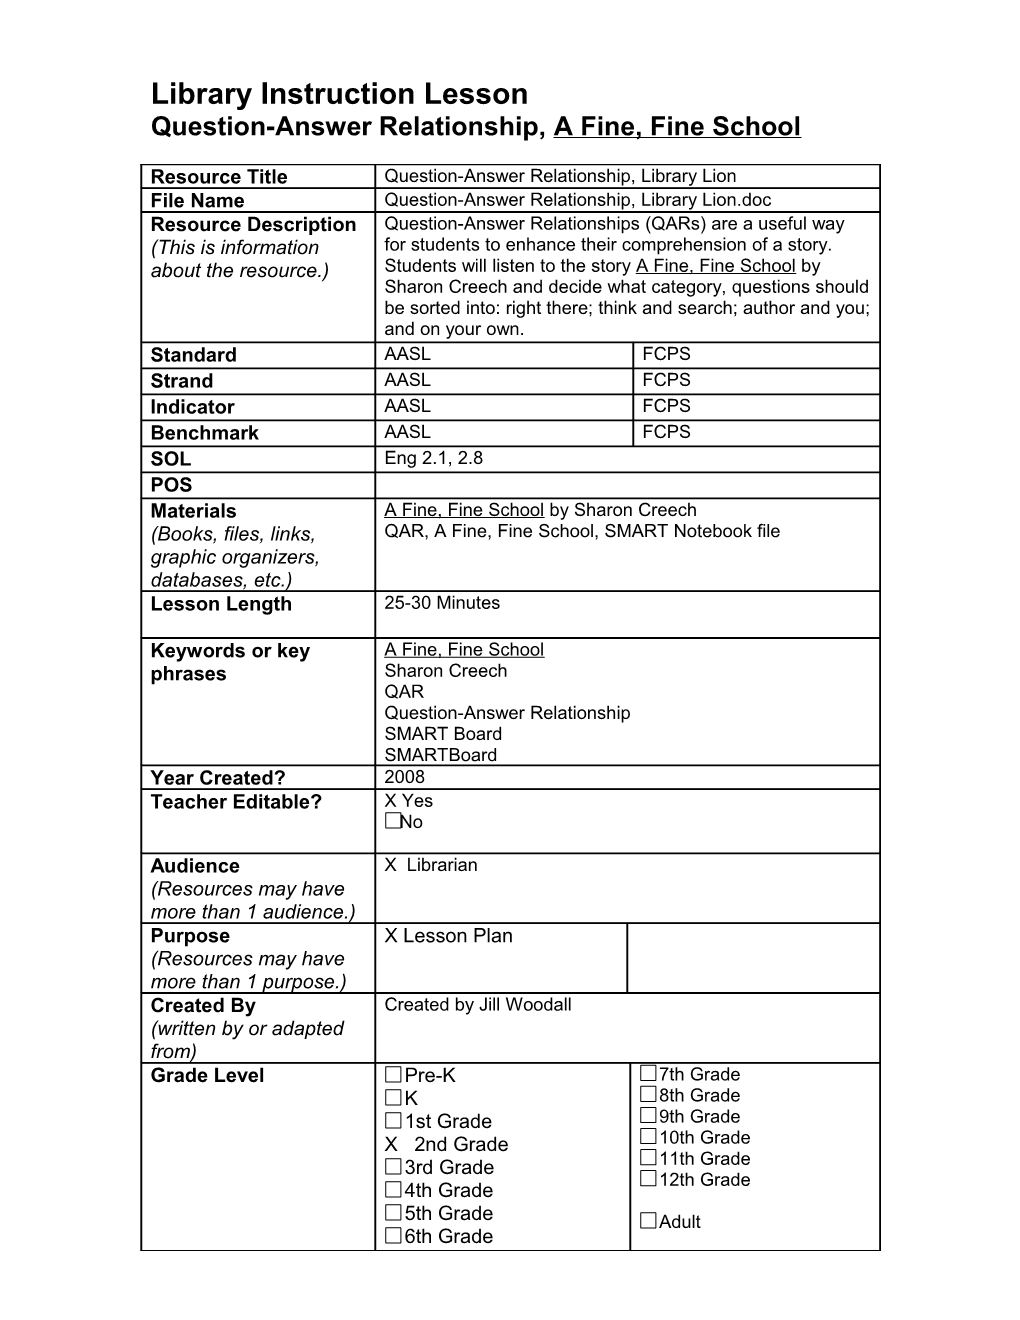 Library Instruction Lesson Database Template s3